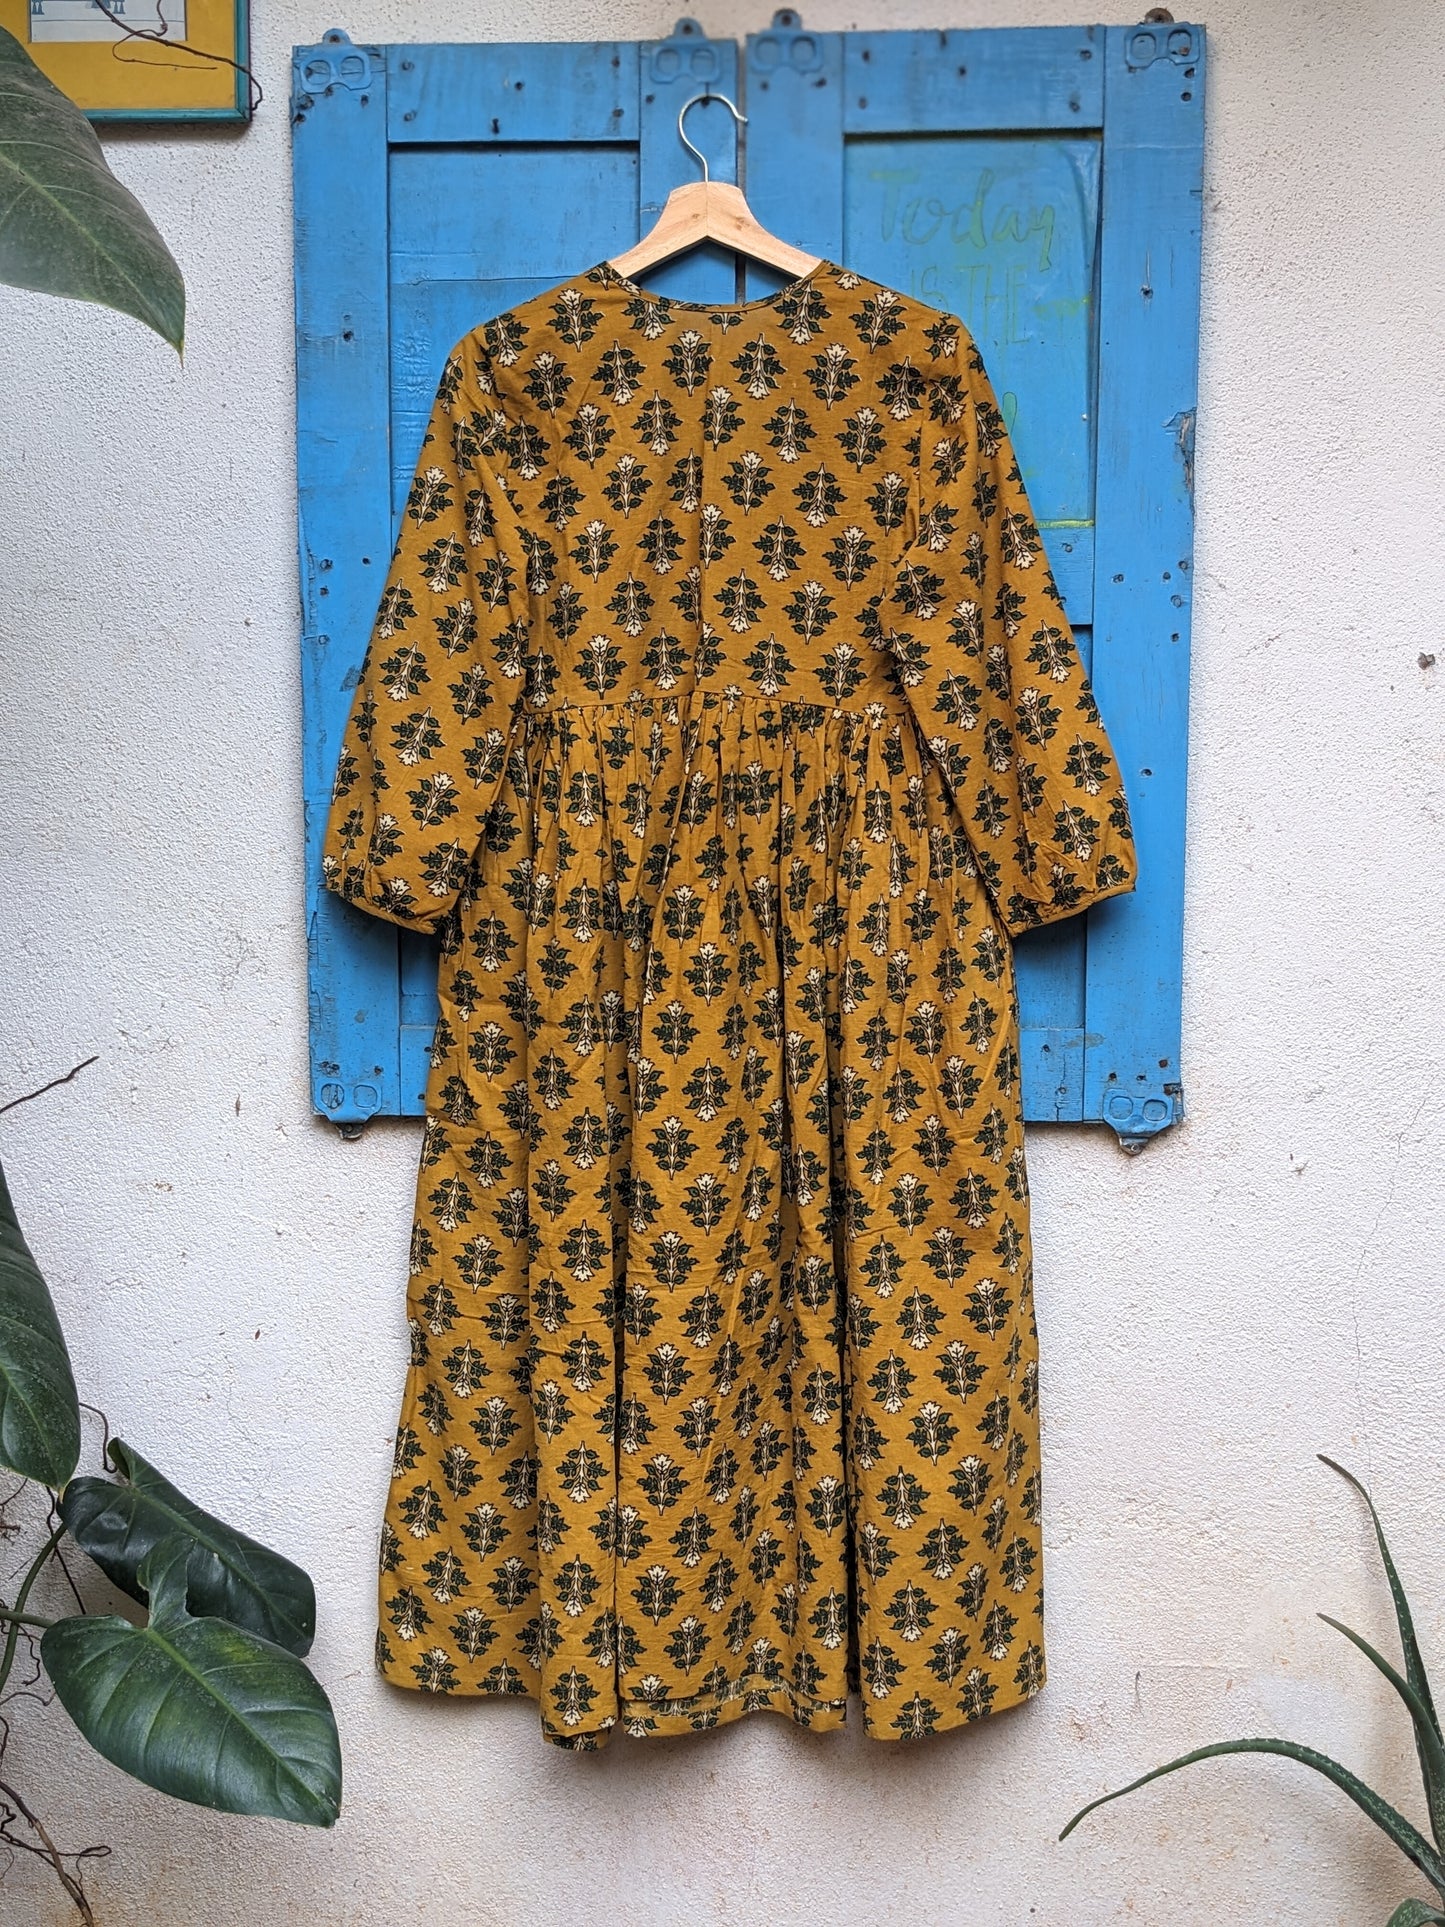 Women's cotton full length dress with 3/4th sleeves, floral block print - Back image